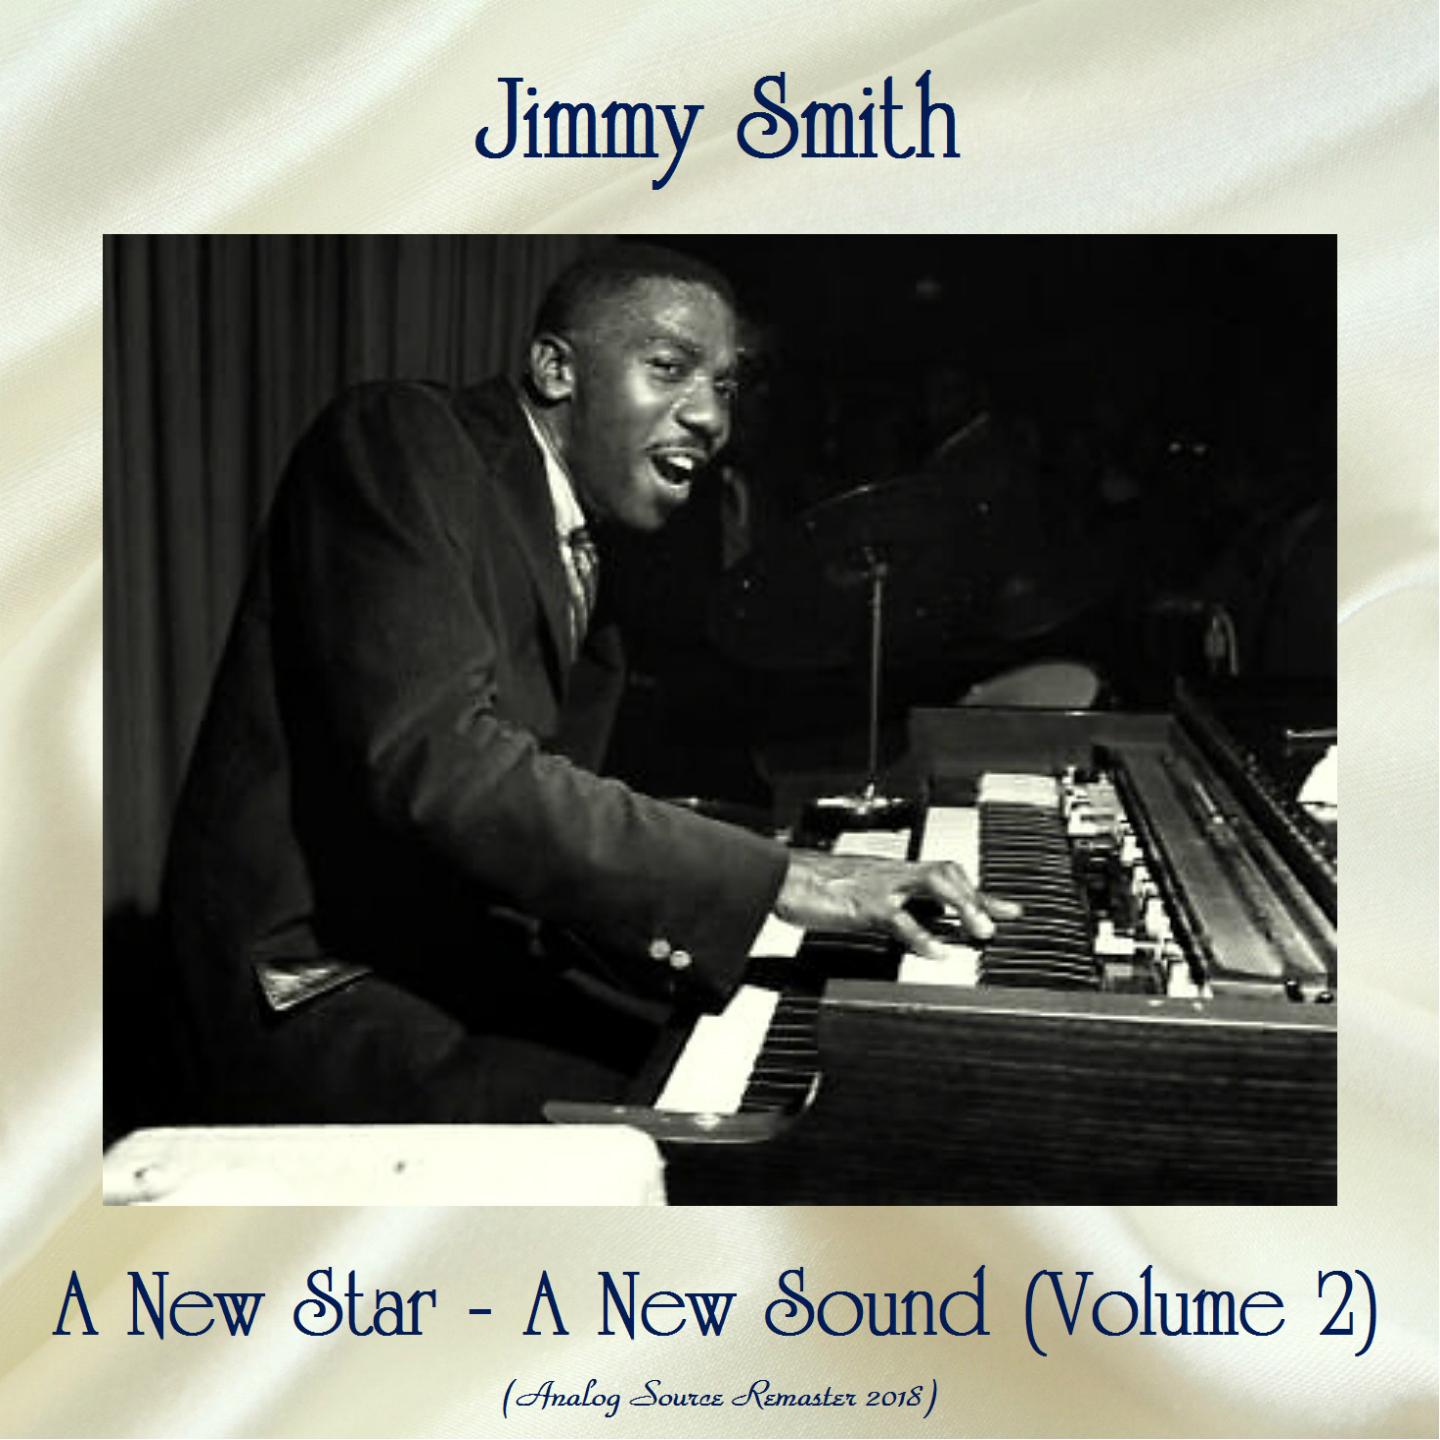 A New Star - A New Sound (Volume 2) (Analog Source Remaster 2018)